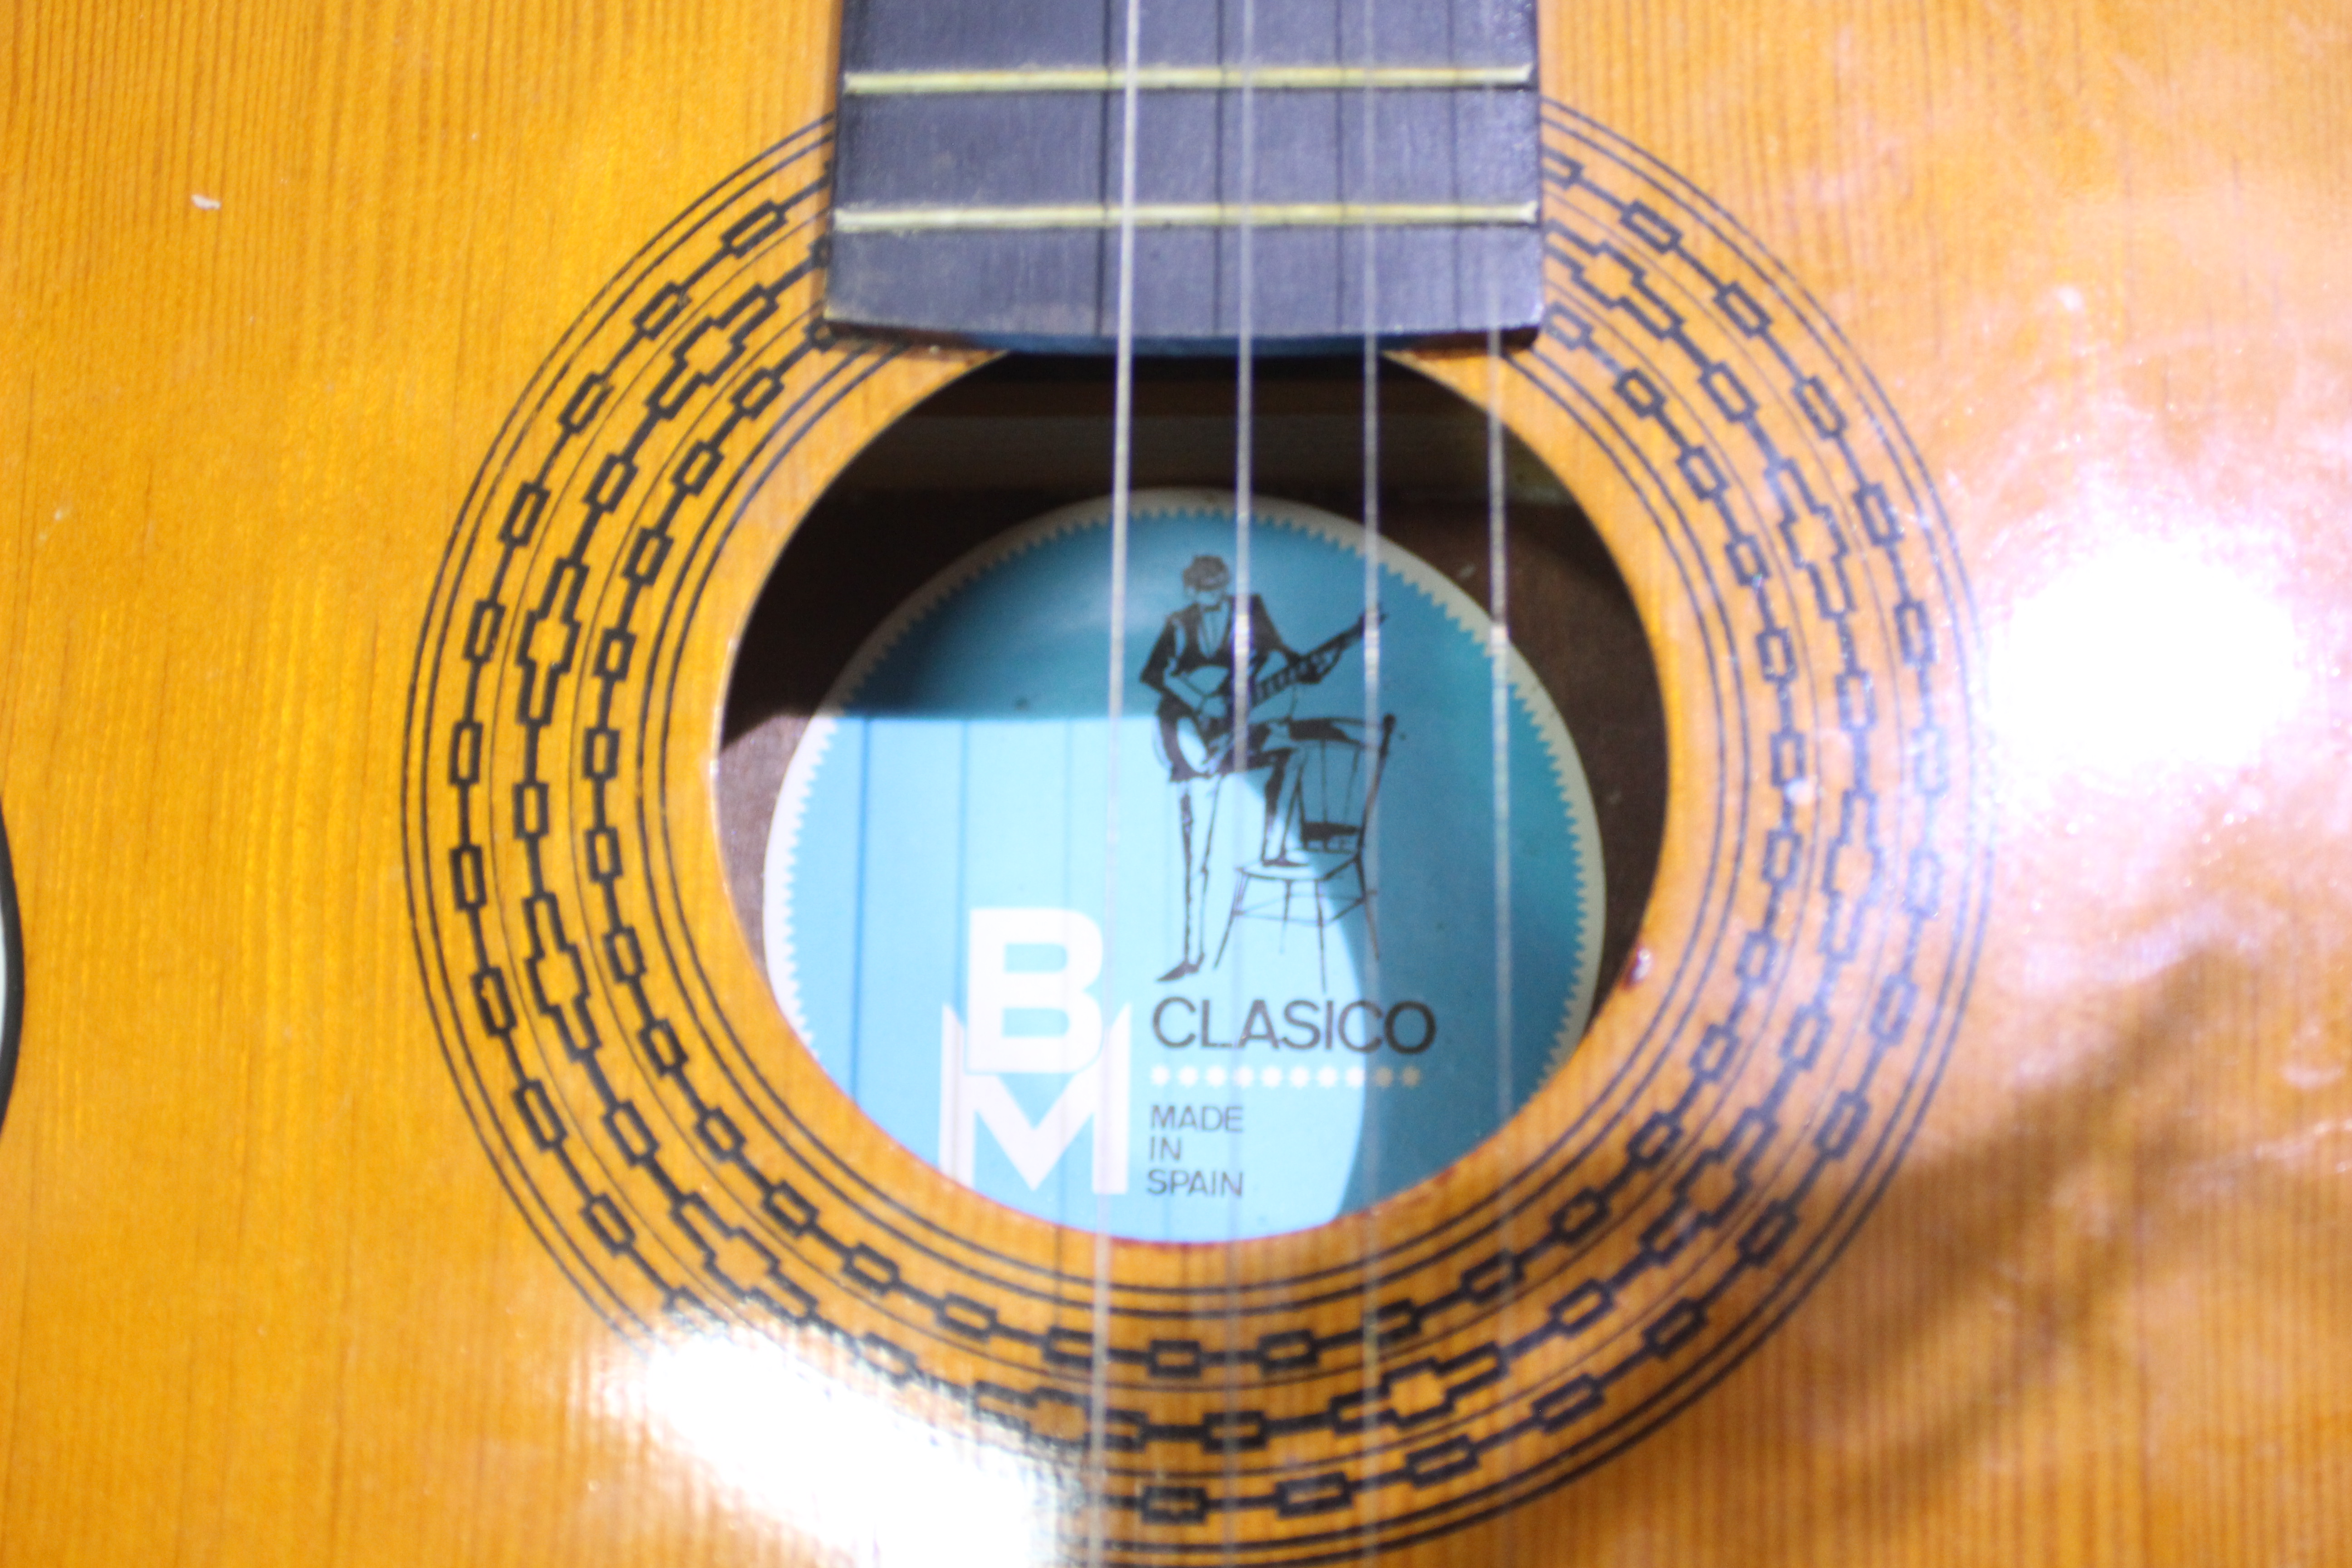 A BM Clasico Spanish made acoustic guitar. Appears in good condition. - Image 2 of 4